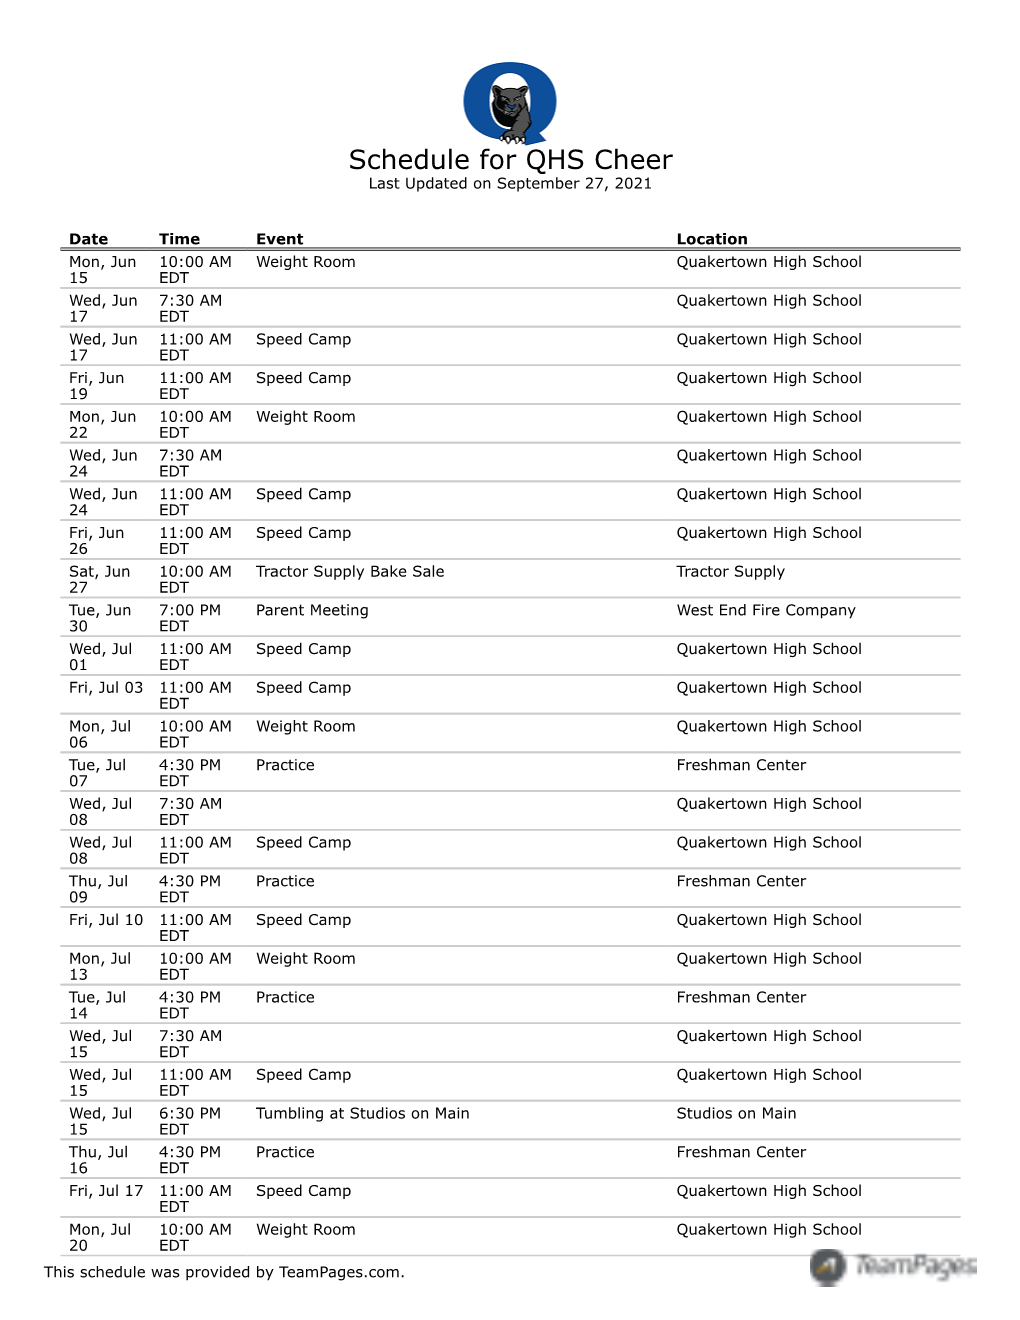 Schedule for QHS Cheer Last Updated on September 27, 2021